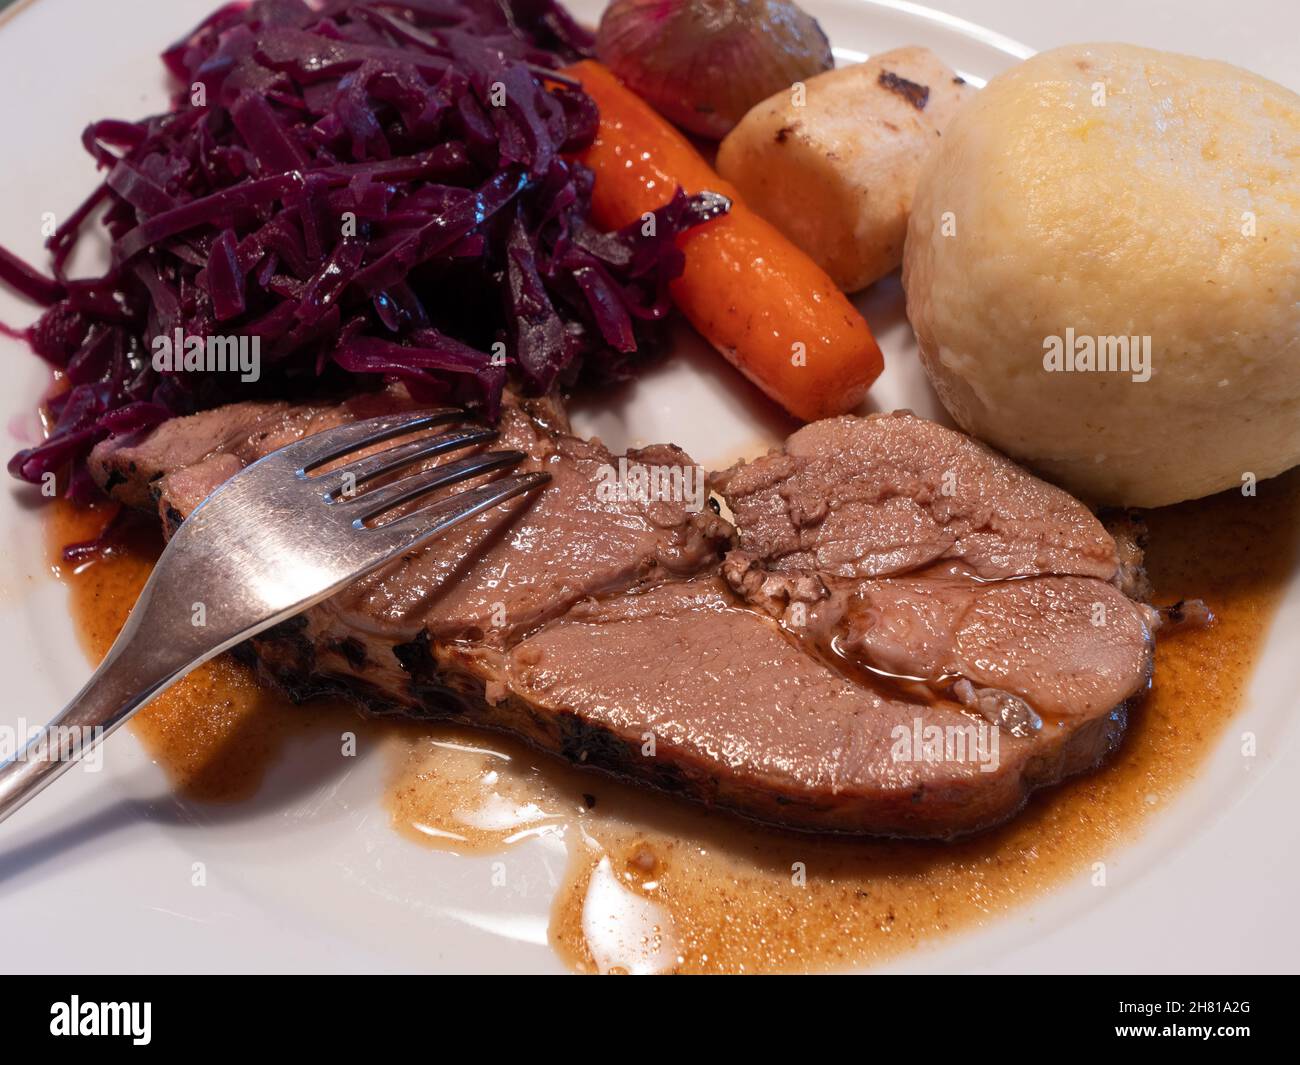 Slice of Roast Young Wild Boar Piglet with Red Cabbage, Potato Dumpling, Winter Vegetables and Gravy Stock Photo